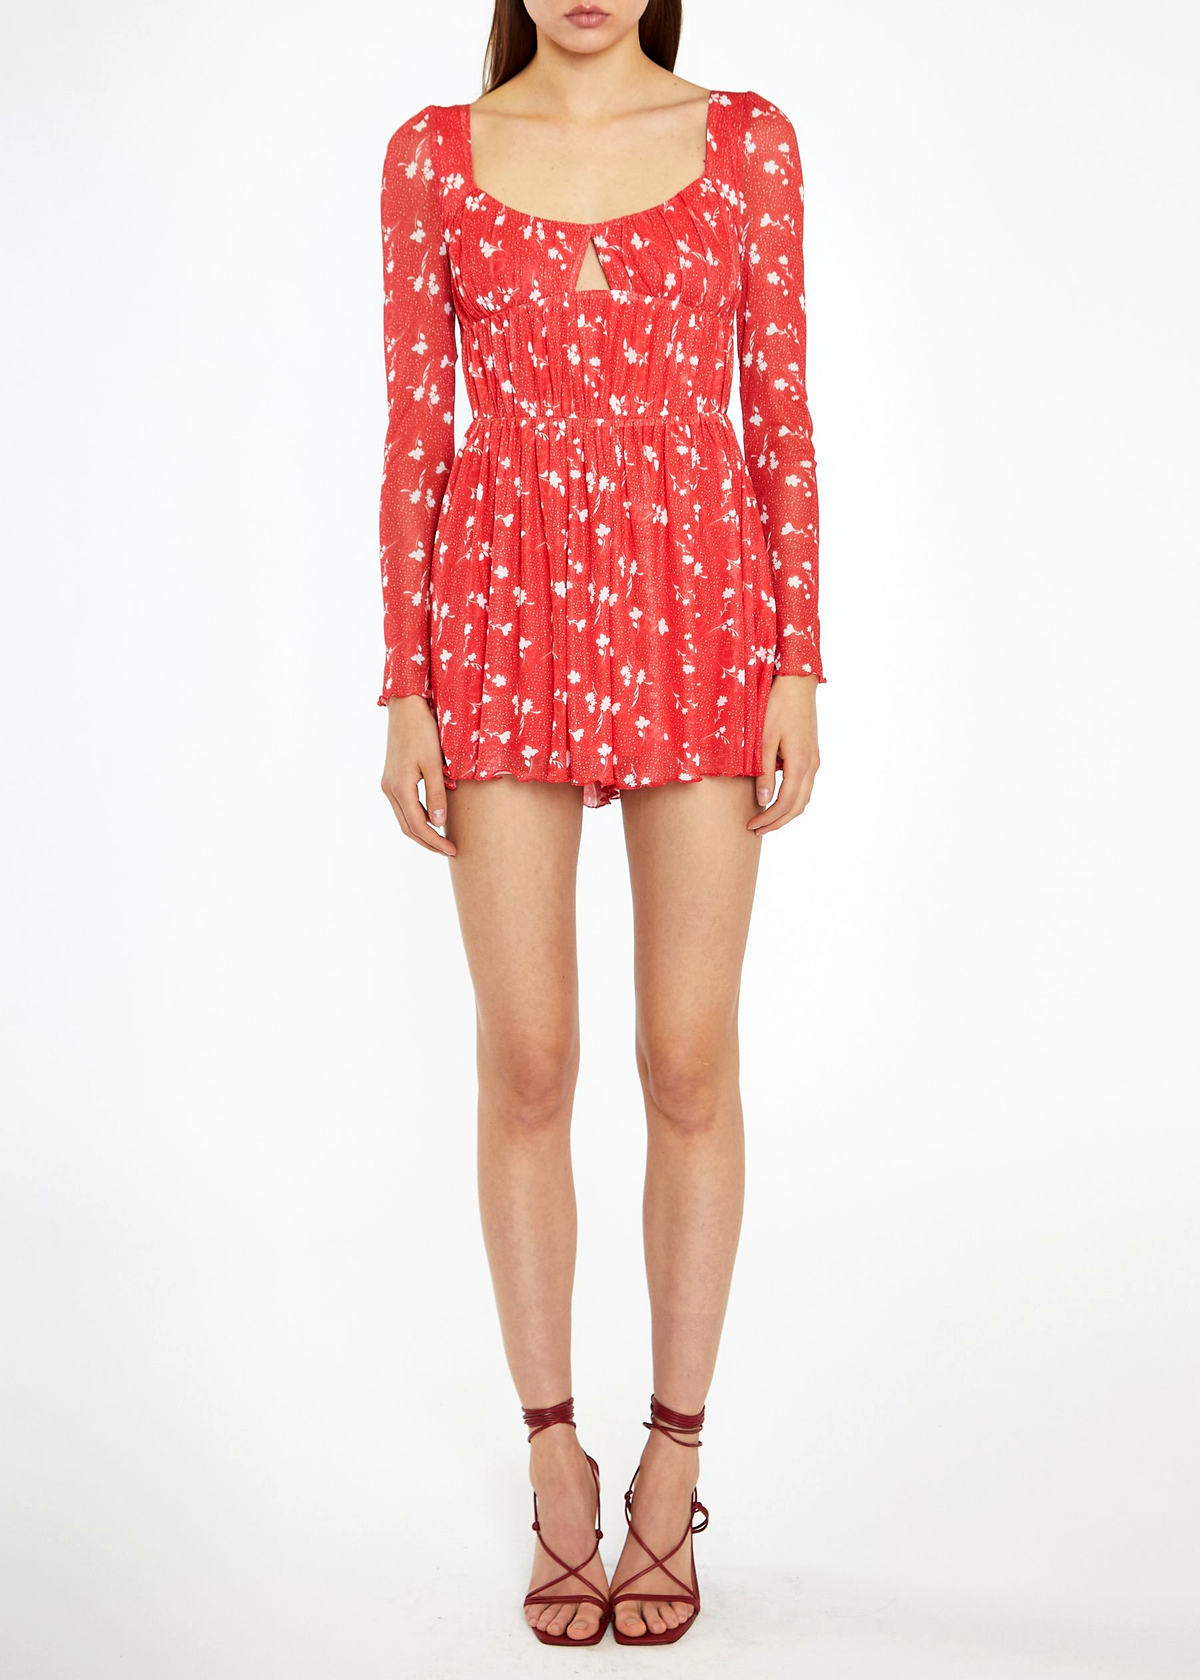 Slinky Stretchy Sun Faded Red and White Floral Mesh Long Sleeve Playsuit Romper by Glamorous UK